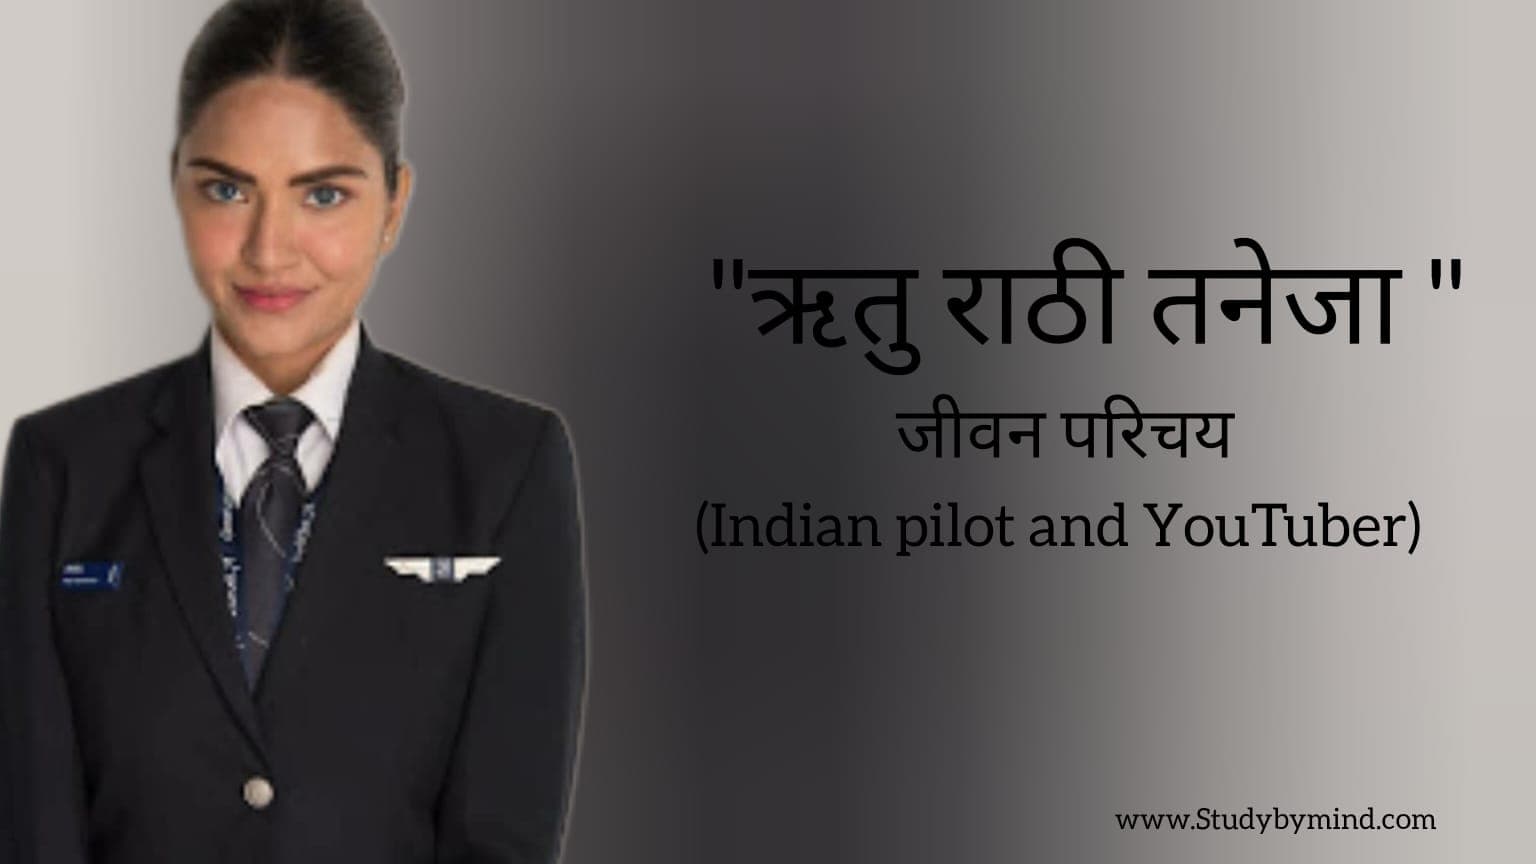 You are currently viewing रितु राठी तनेजा जीवन परिचय Ritu Rathee Taneja biography in hindi (Indian pilot and YouTuber)